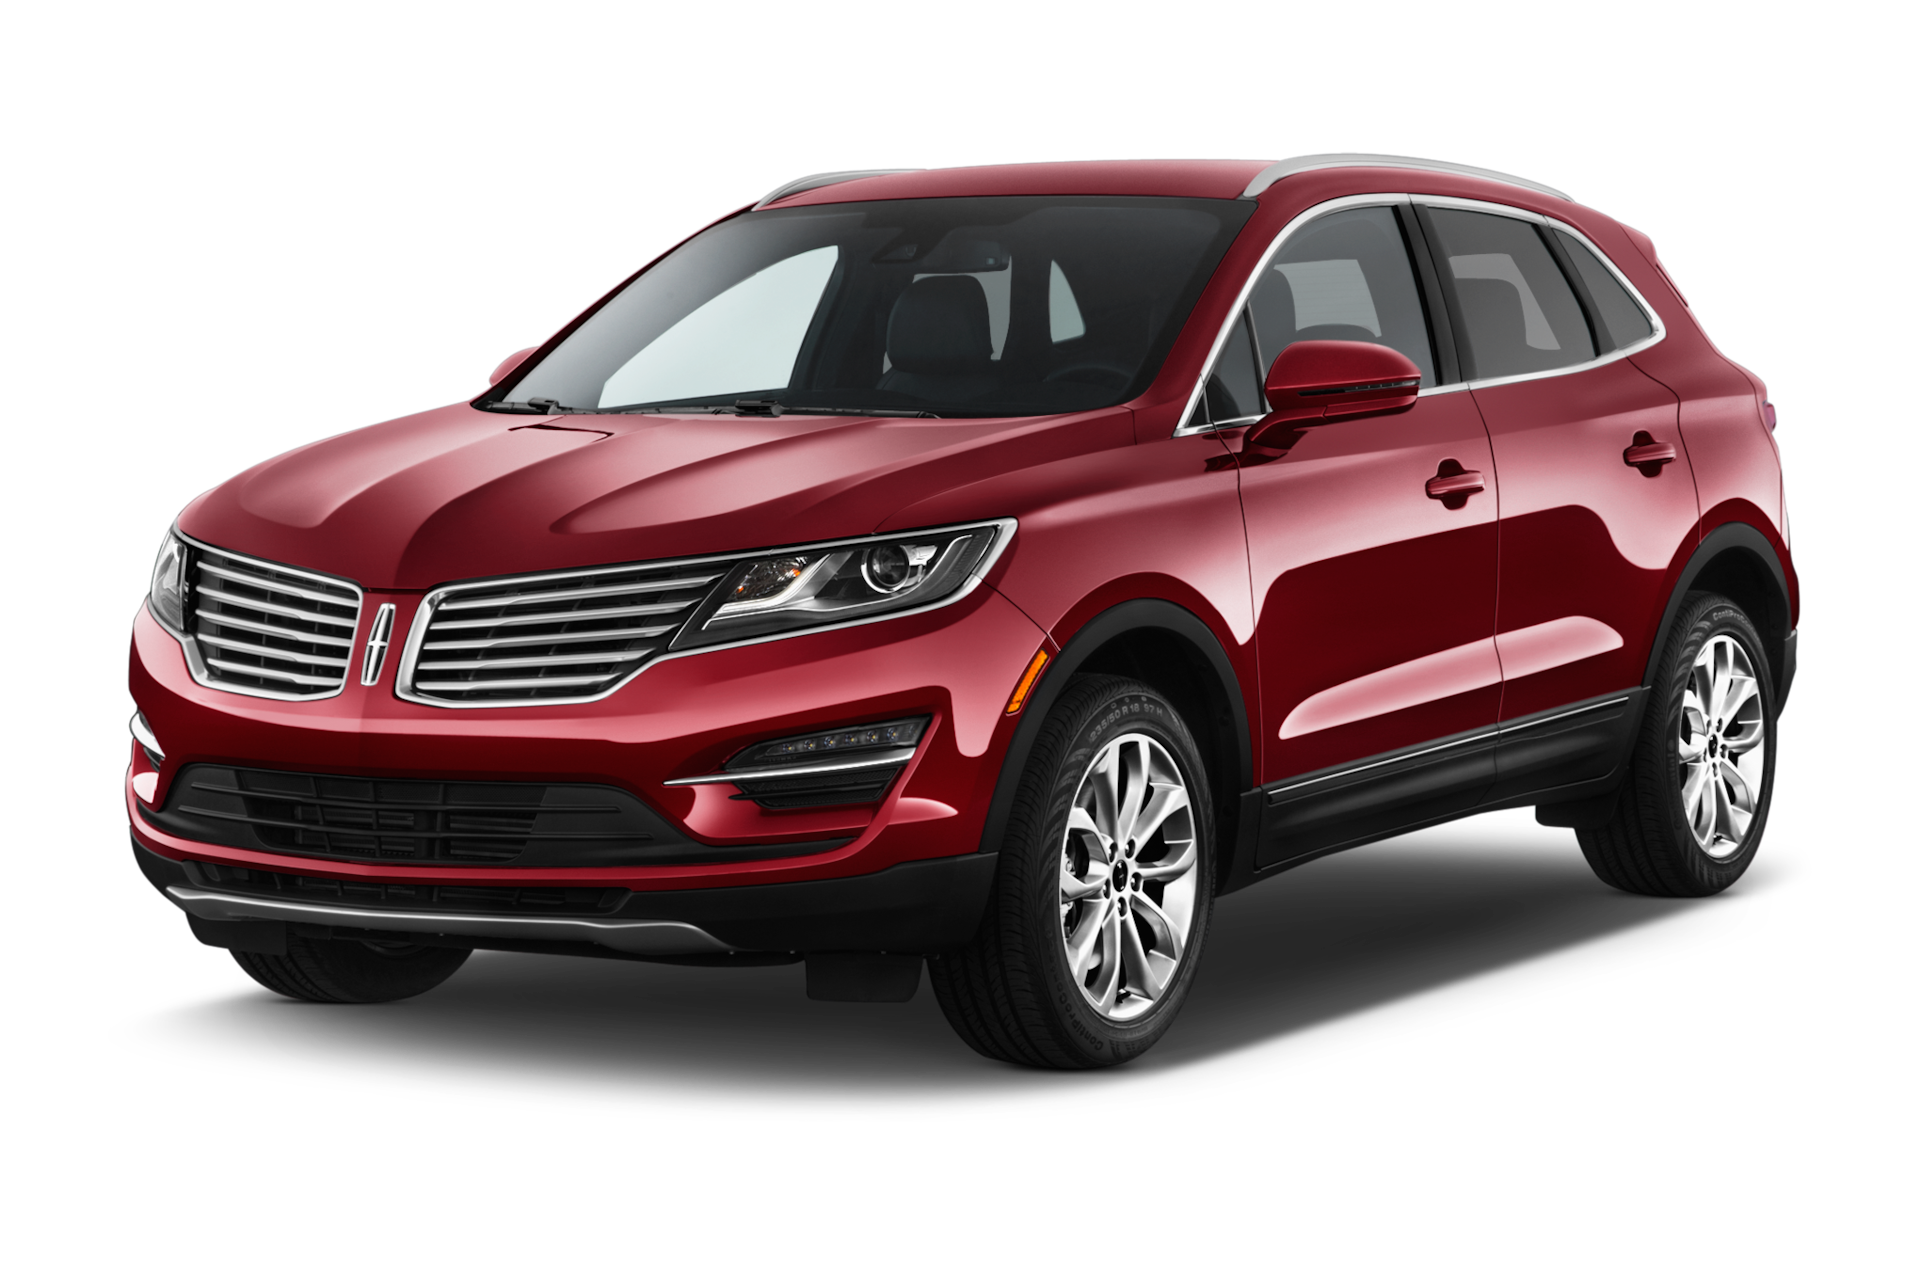 2015 Lincoln MKC Prices, Reviews, and Photos - MotorTrend